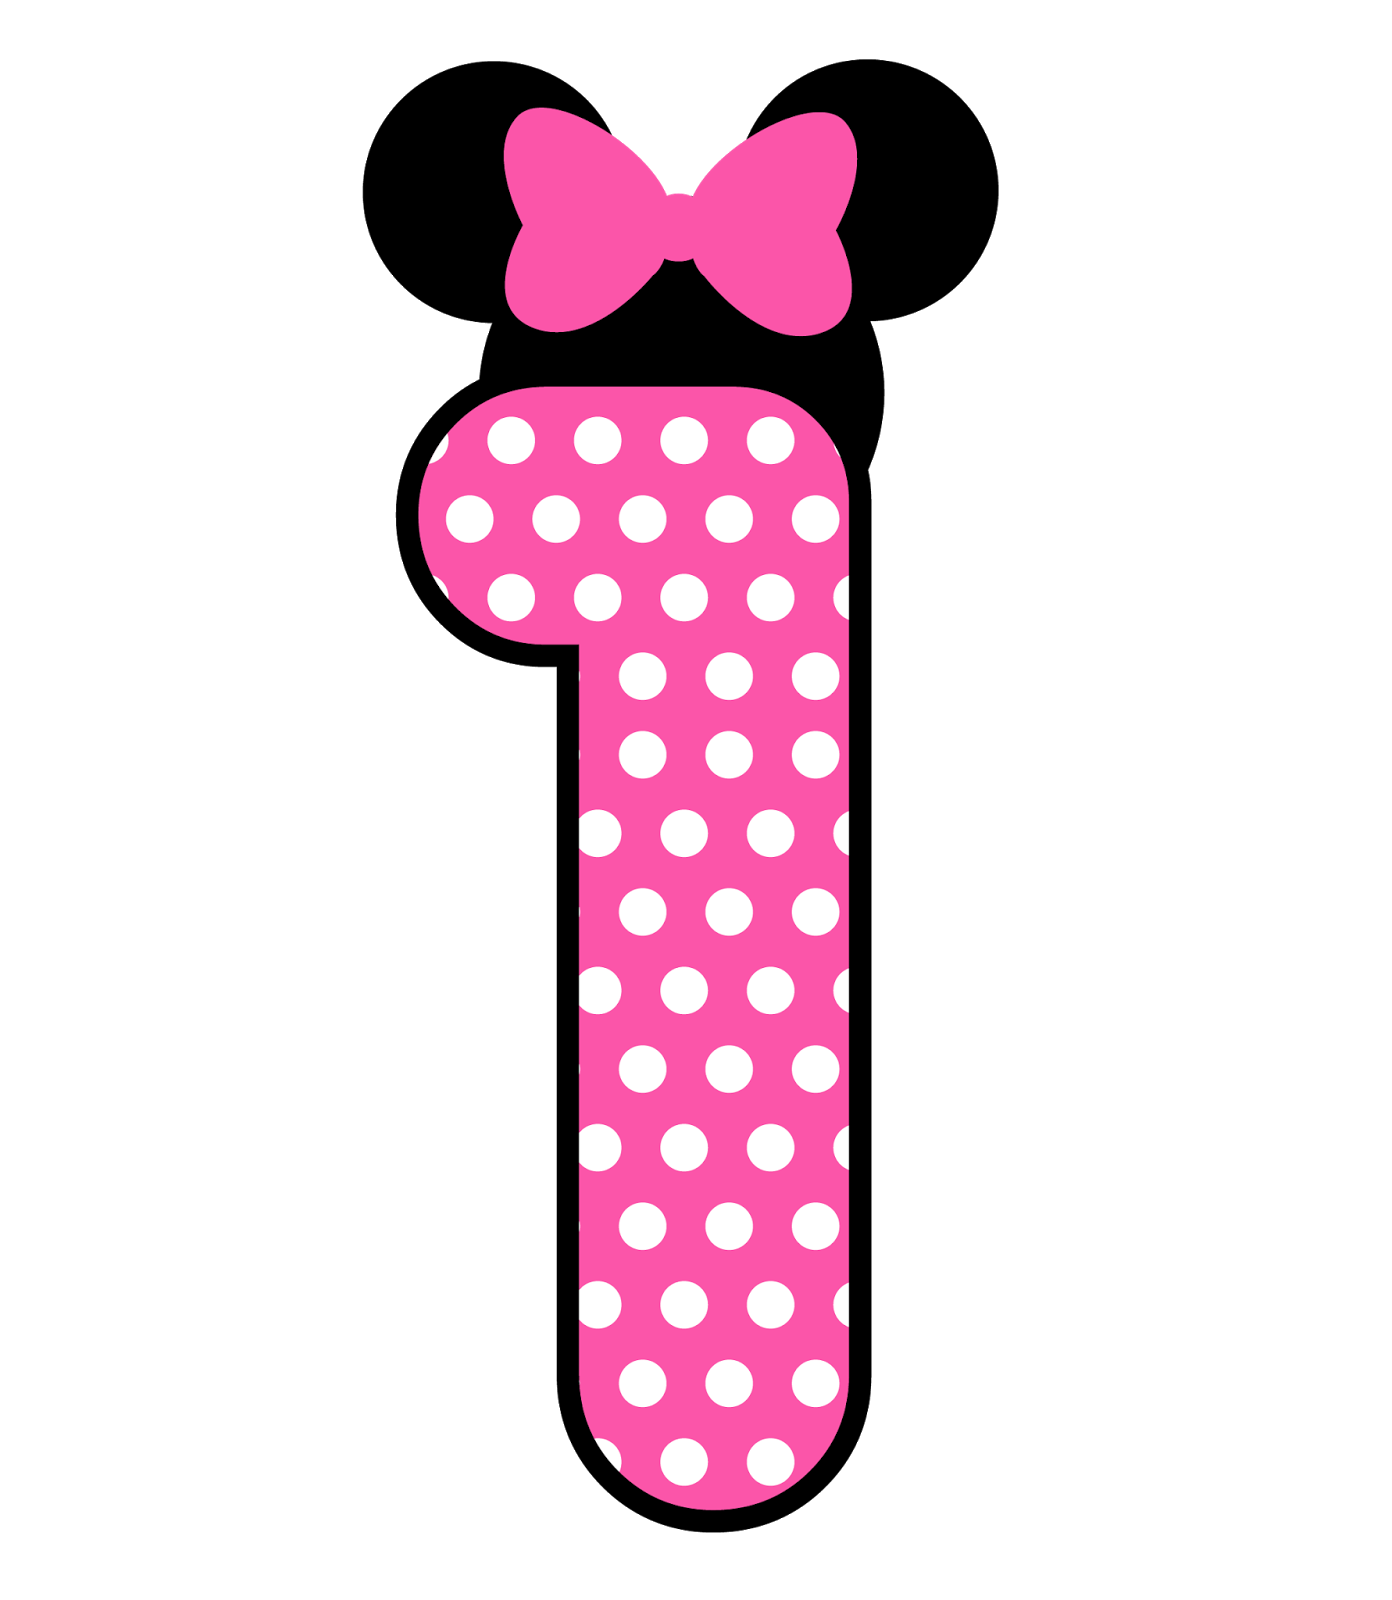 number 1 clipart pink